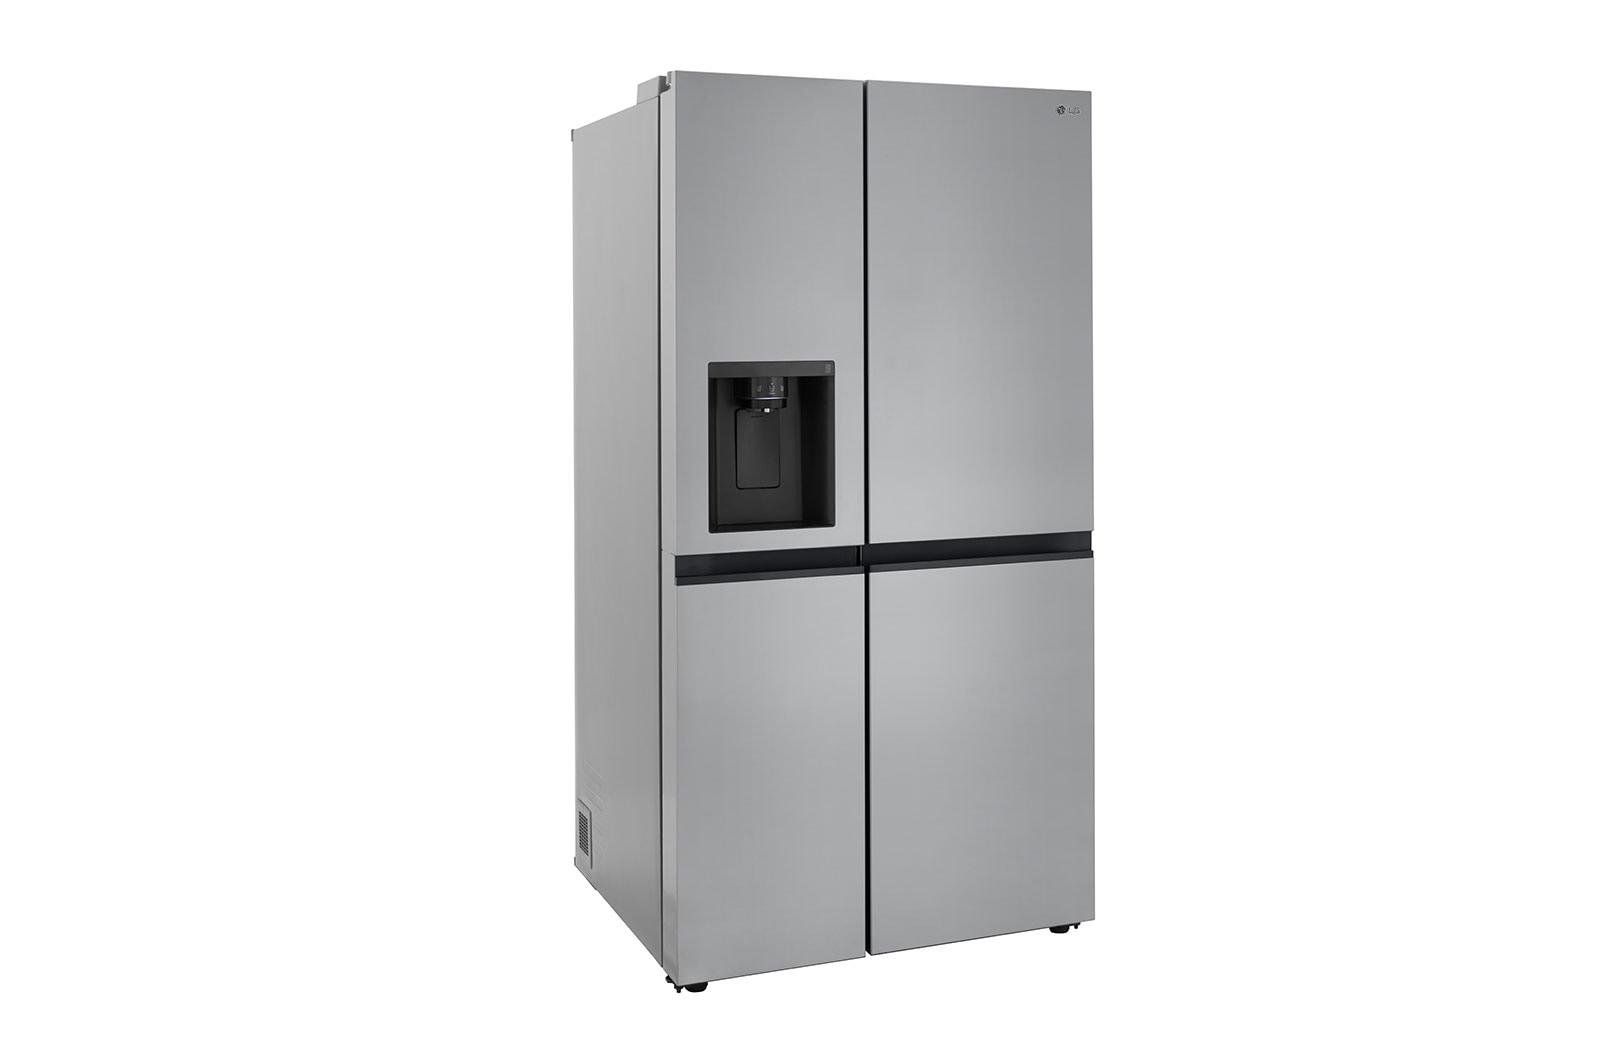 Lg 23 cu. ft. Side-by-Side Counter-Depth Refrigerator with Smooth Touch Dispenser